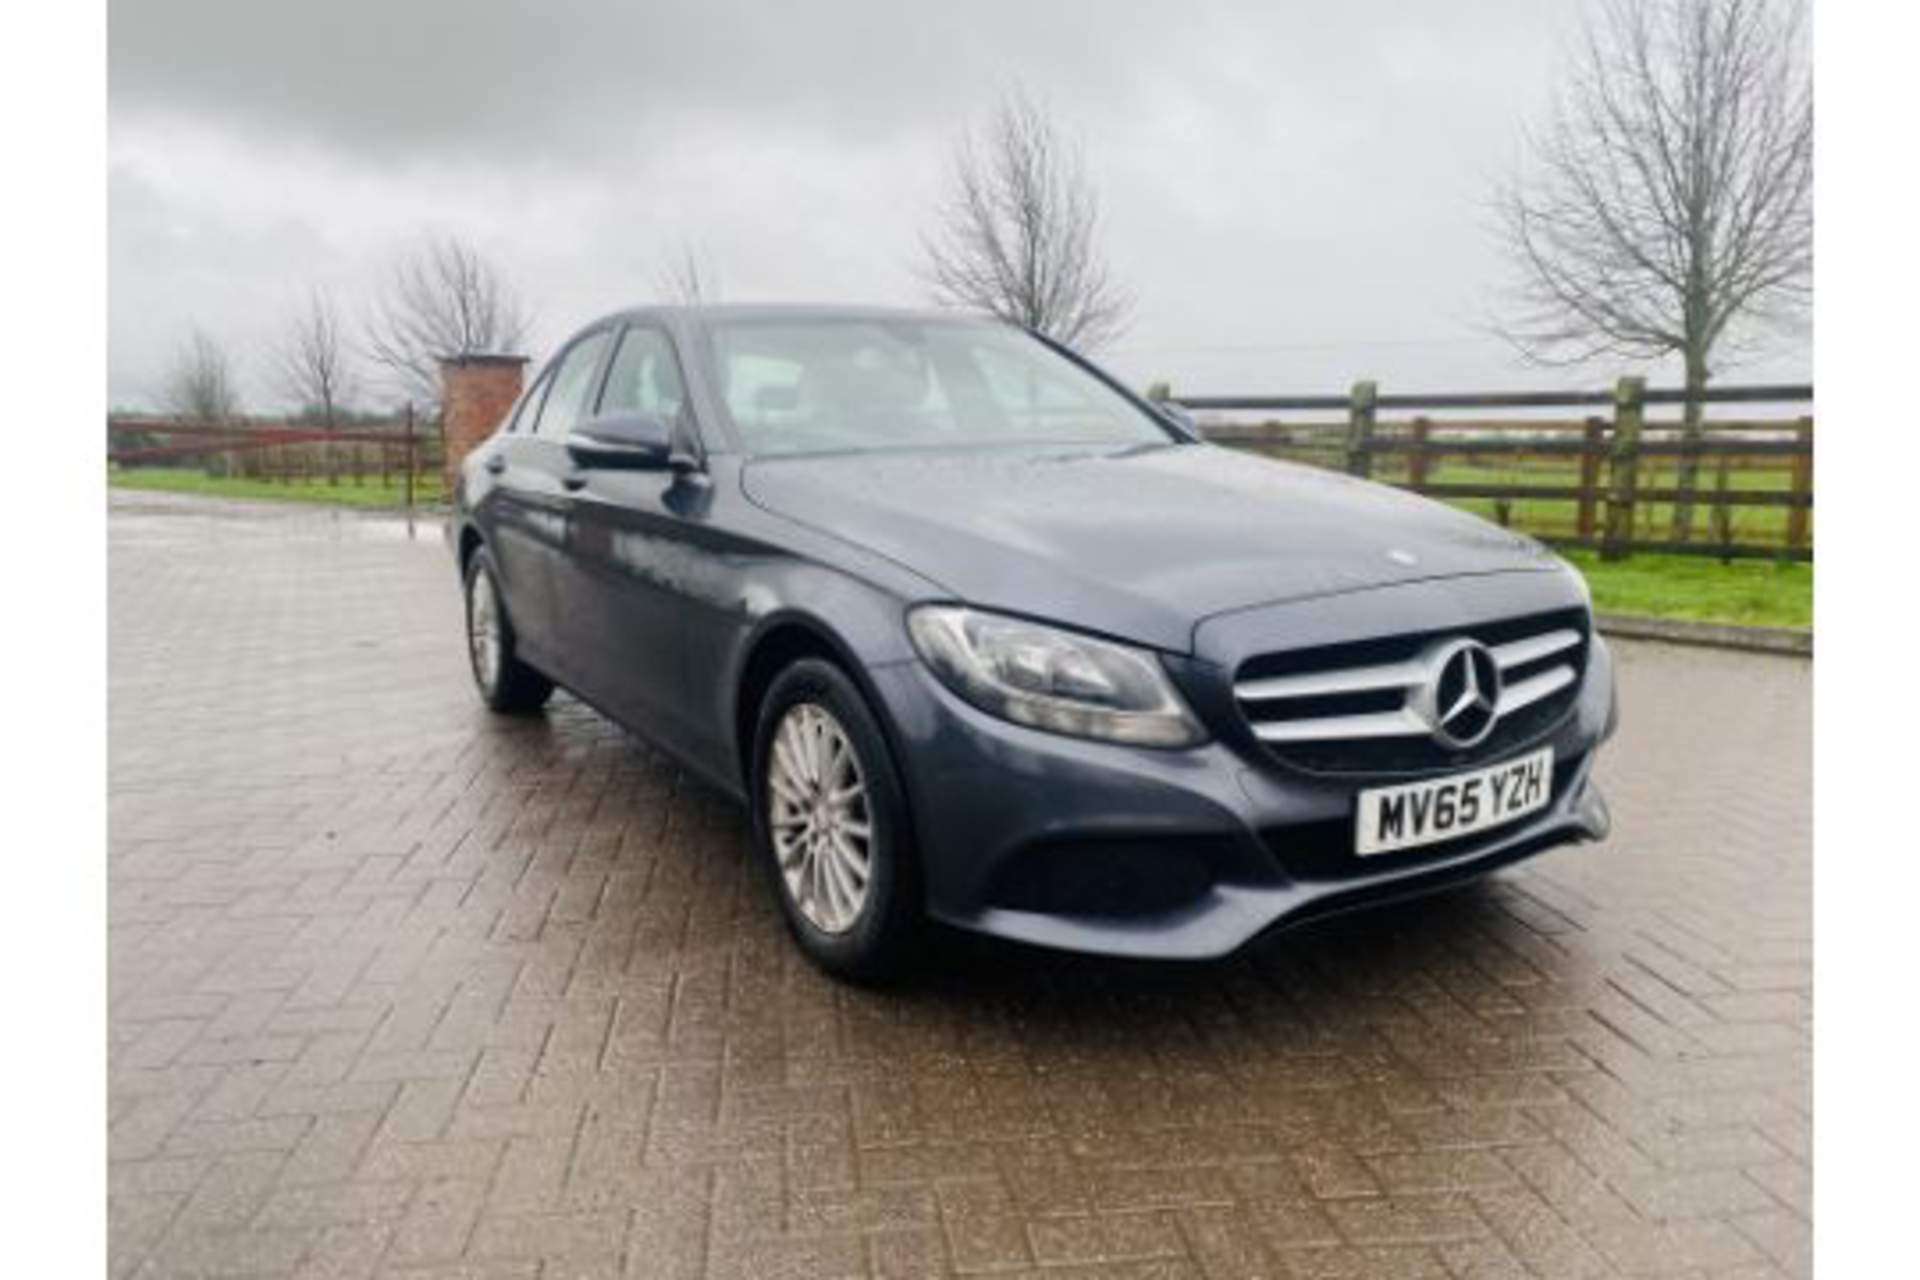 MERCEDES C220d "SPECIAL EQUIPMENT" SE SALOON - 2016 MODEL - LEATHER - NEW SHAPE - AIR CON - NO VAT!! - Image 10 of 26